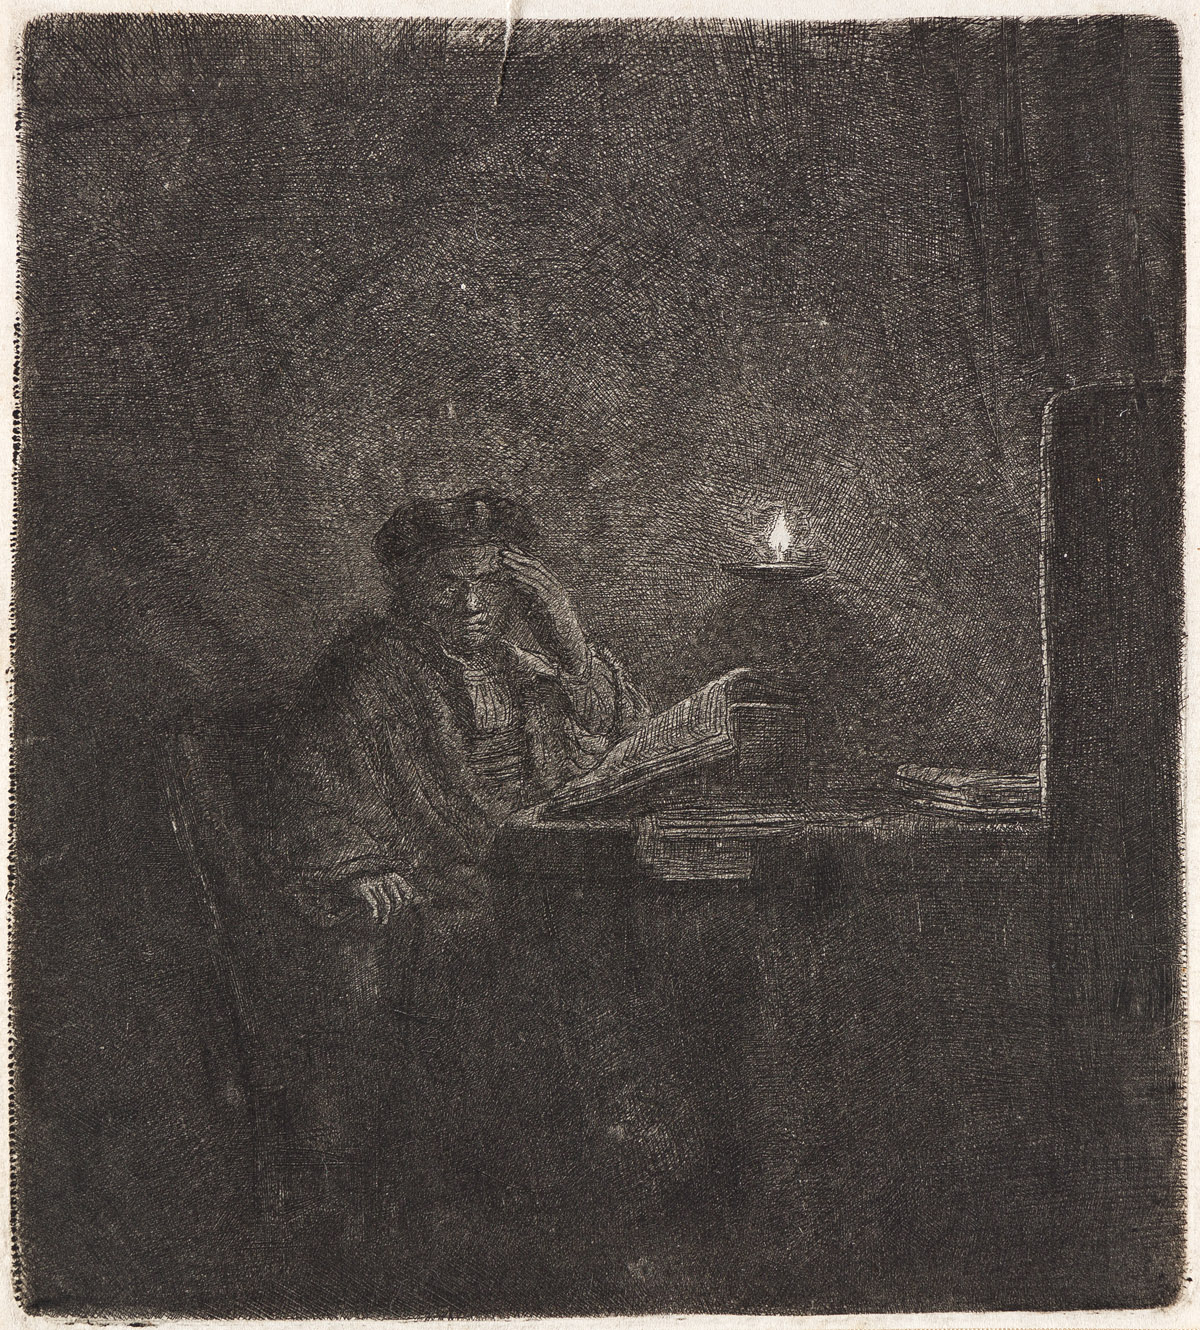 REMBRANDT VAN RIJN A Student at a Table by Candlelight.